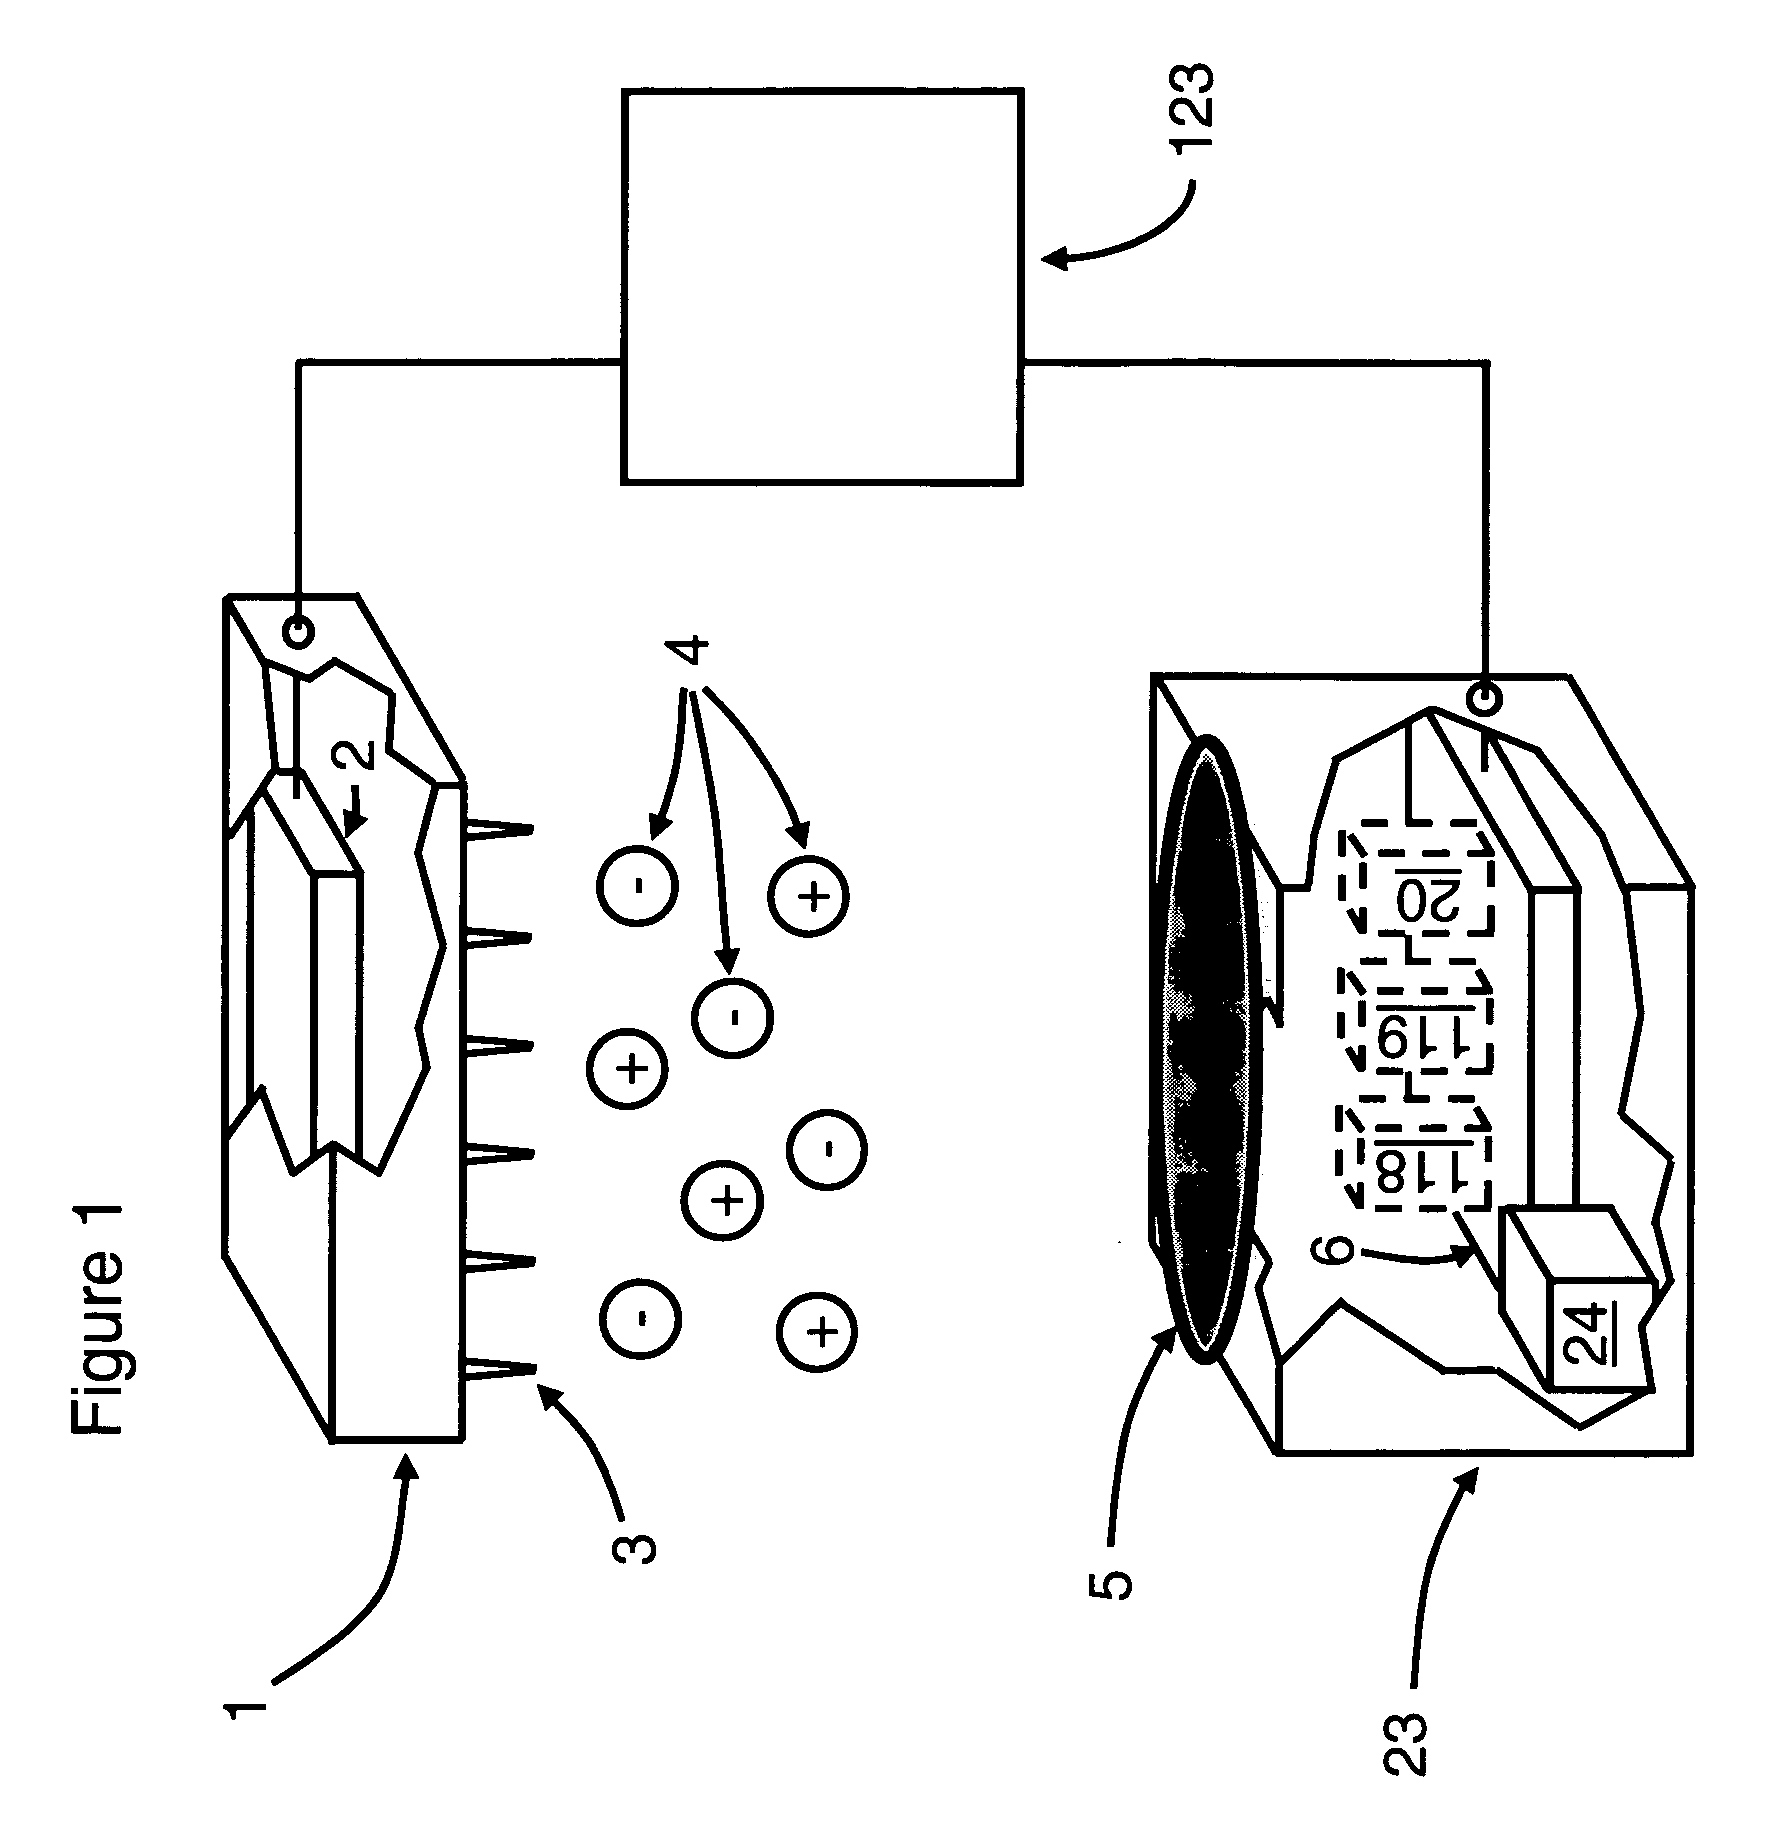 Remote sensor for controlling ionization systems